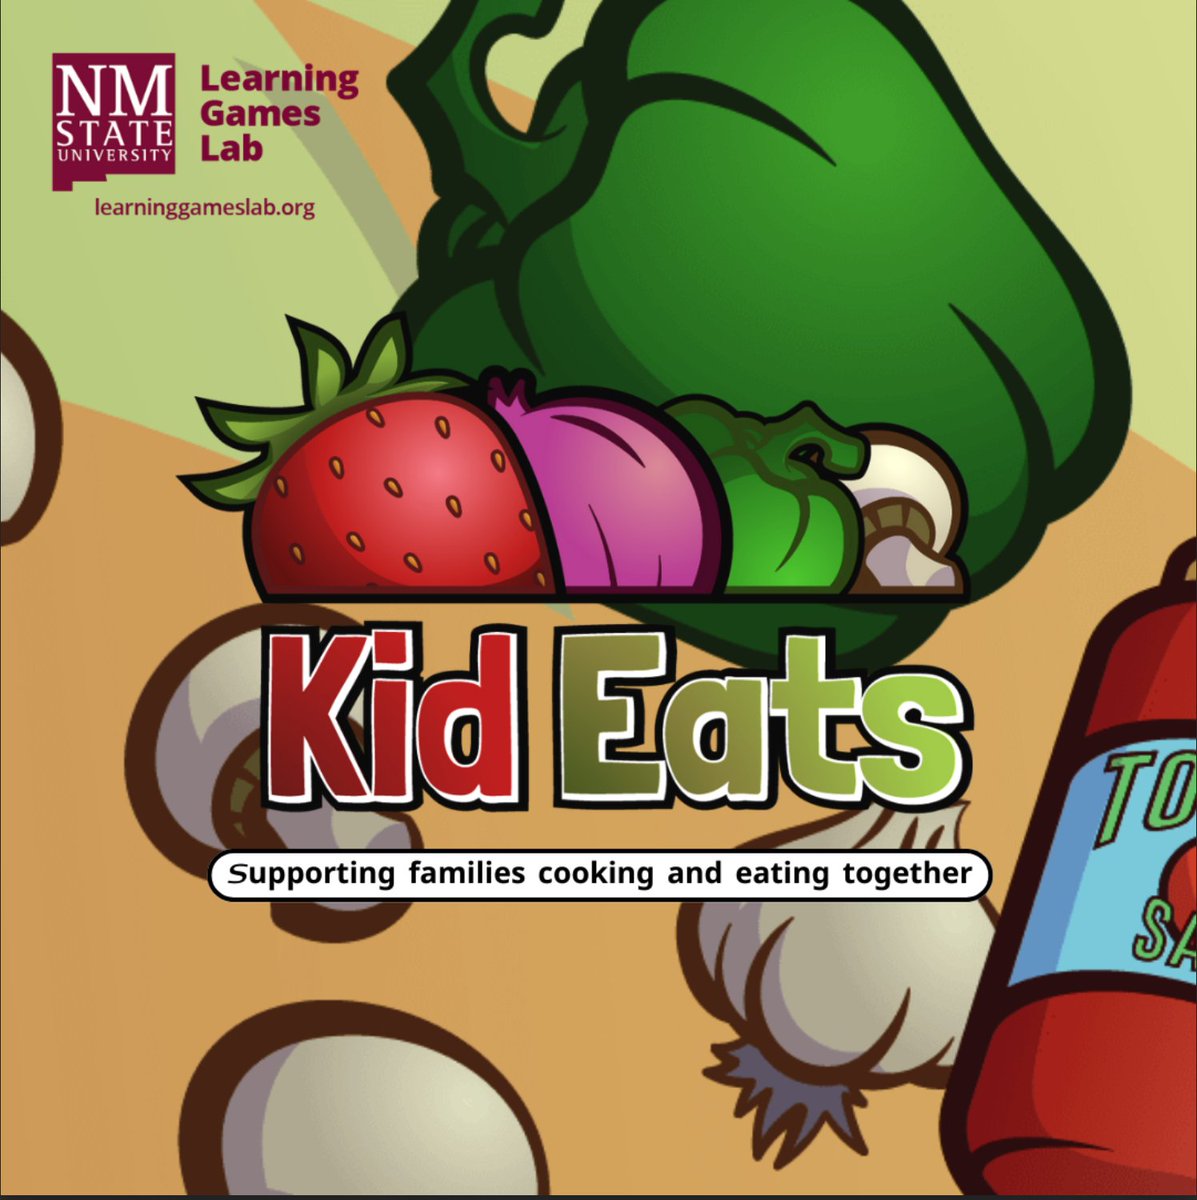 Kid Eats provides educational videos, healthy recipes, and a fun virtual kitchen experience on the iPad, suitable for youth in grades 3-6. 
#kids #games #kidgames #health #food #recipes kideatscooking.org